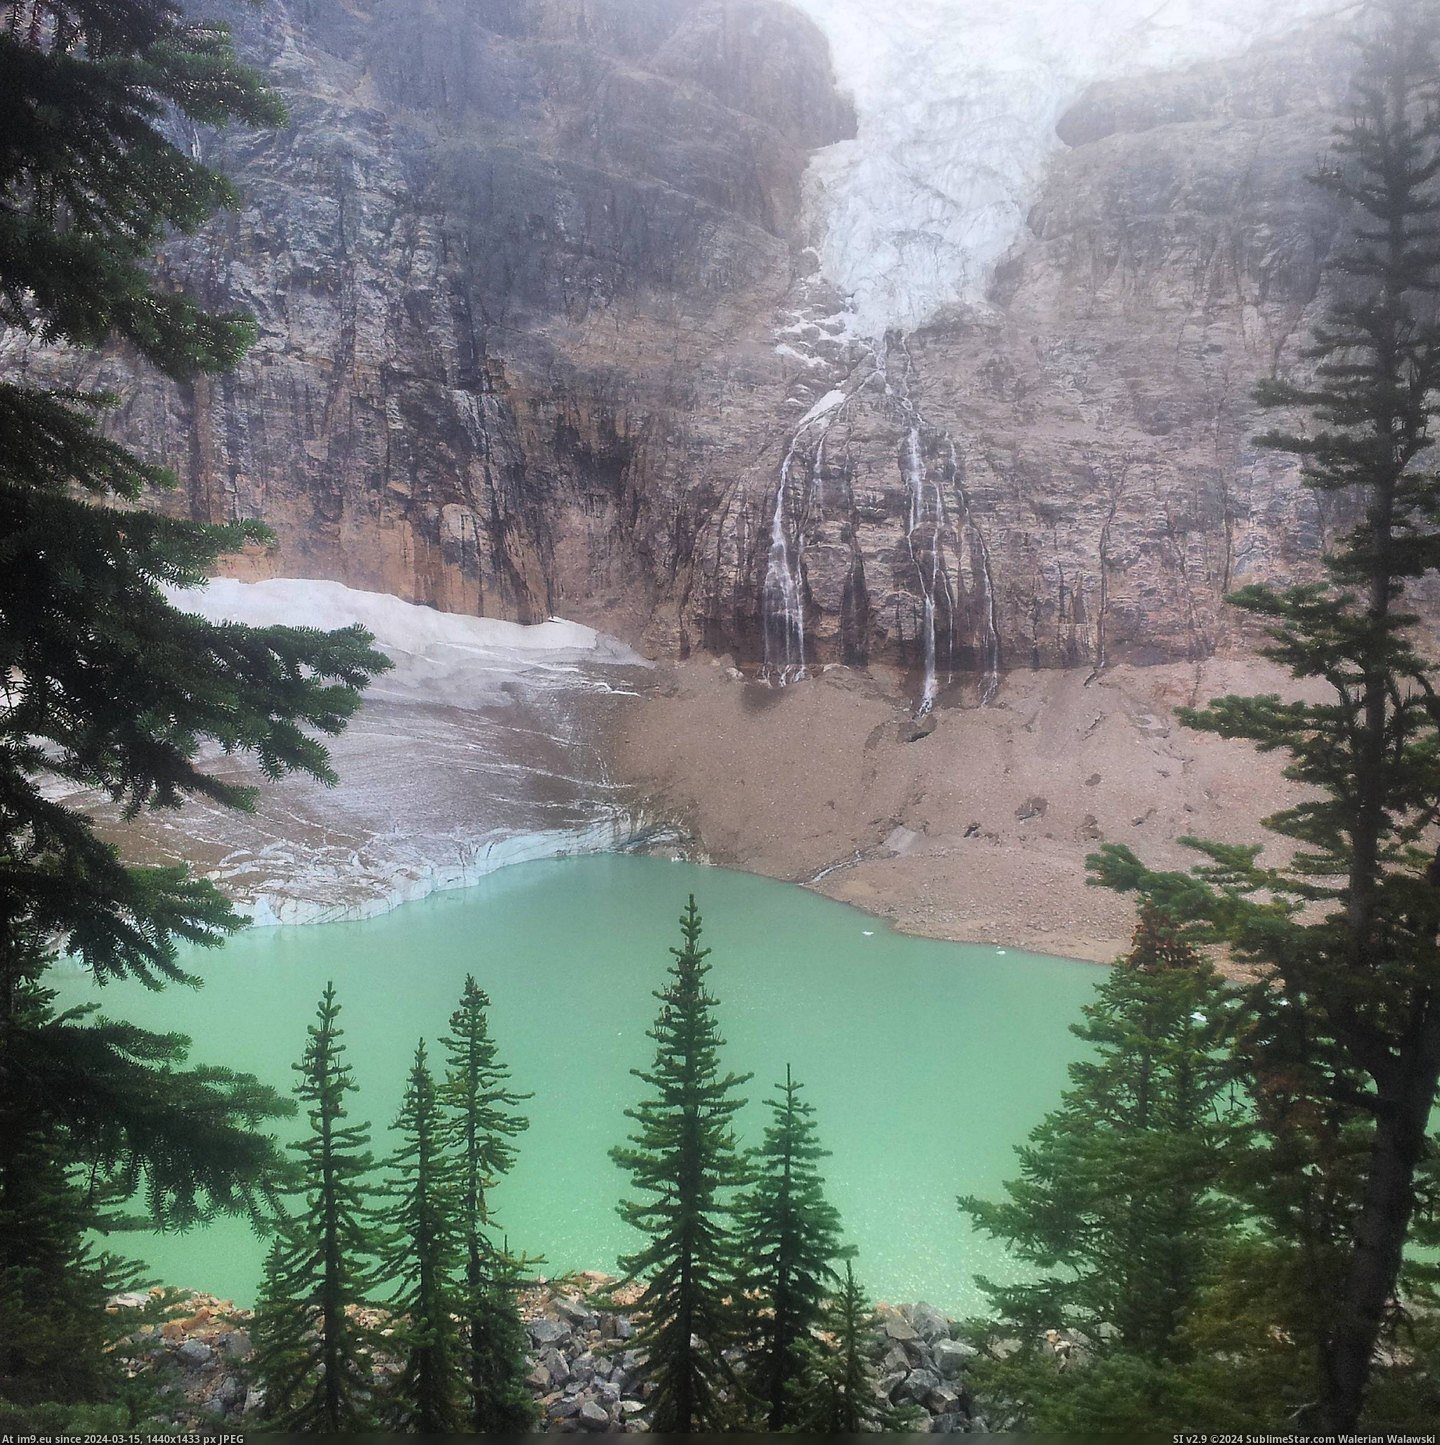 #Park #National #Angel #Quality #Highly #Crappy #Recommend #Seein #Glacier #Excuse #Jasper #2448x2448 [Earthporn] [2448x2448] Excuse the crappy quality. This is Angel Glacier in Jasper National Park, I would highly recommend seein Pic. (Изображение из альбом My r/EARTHPORN favs))